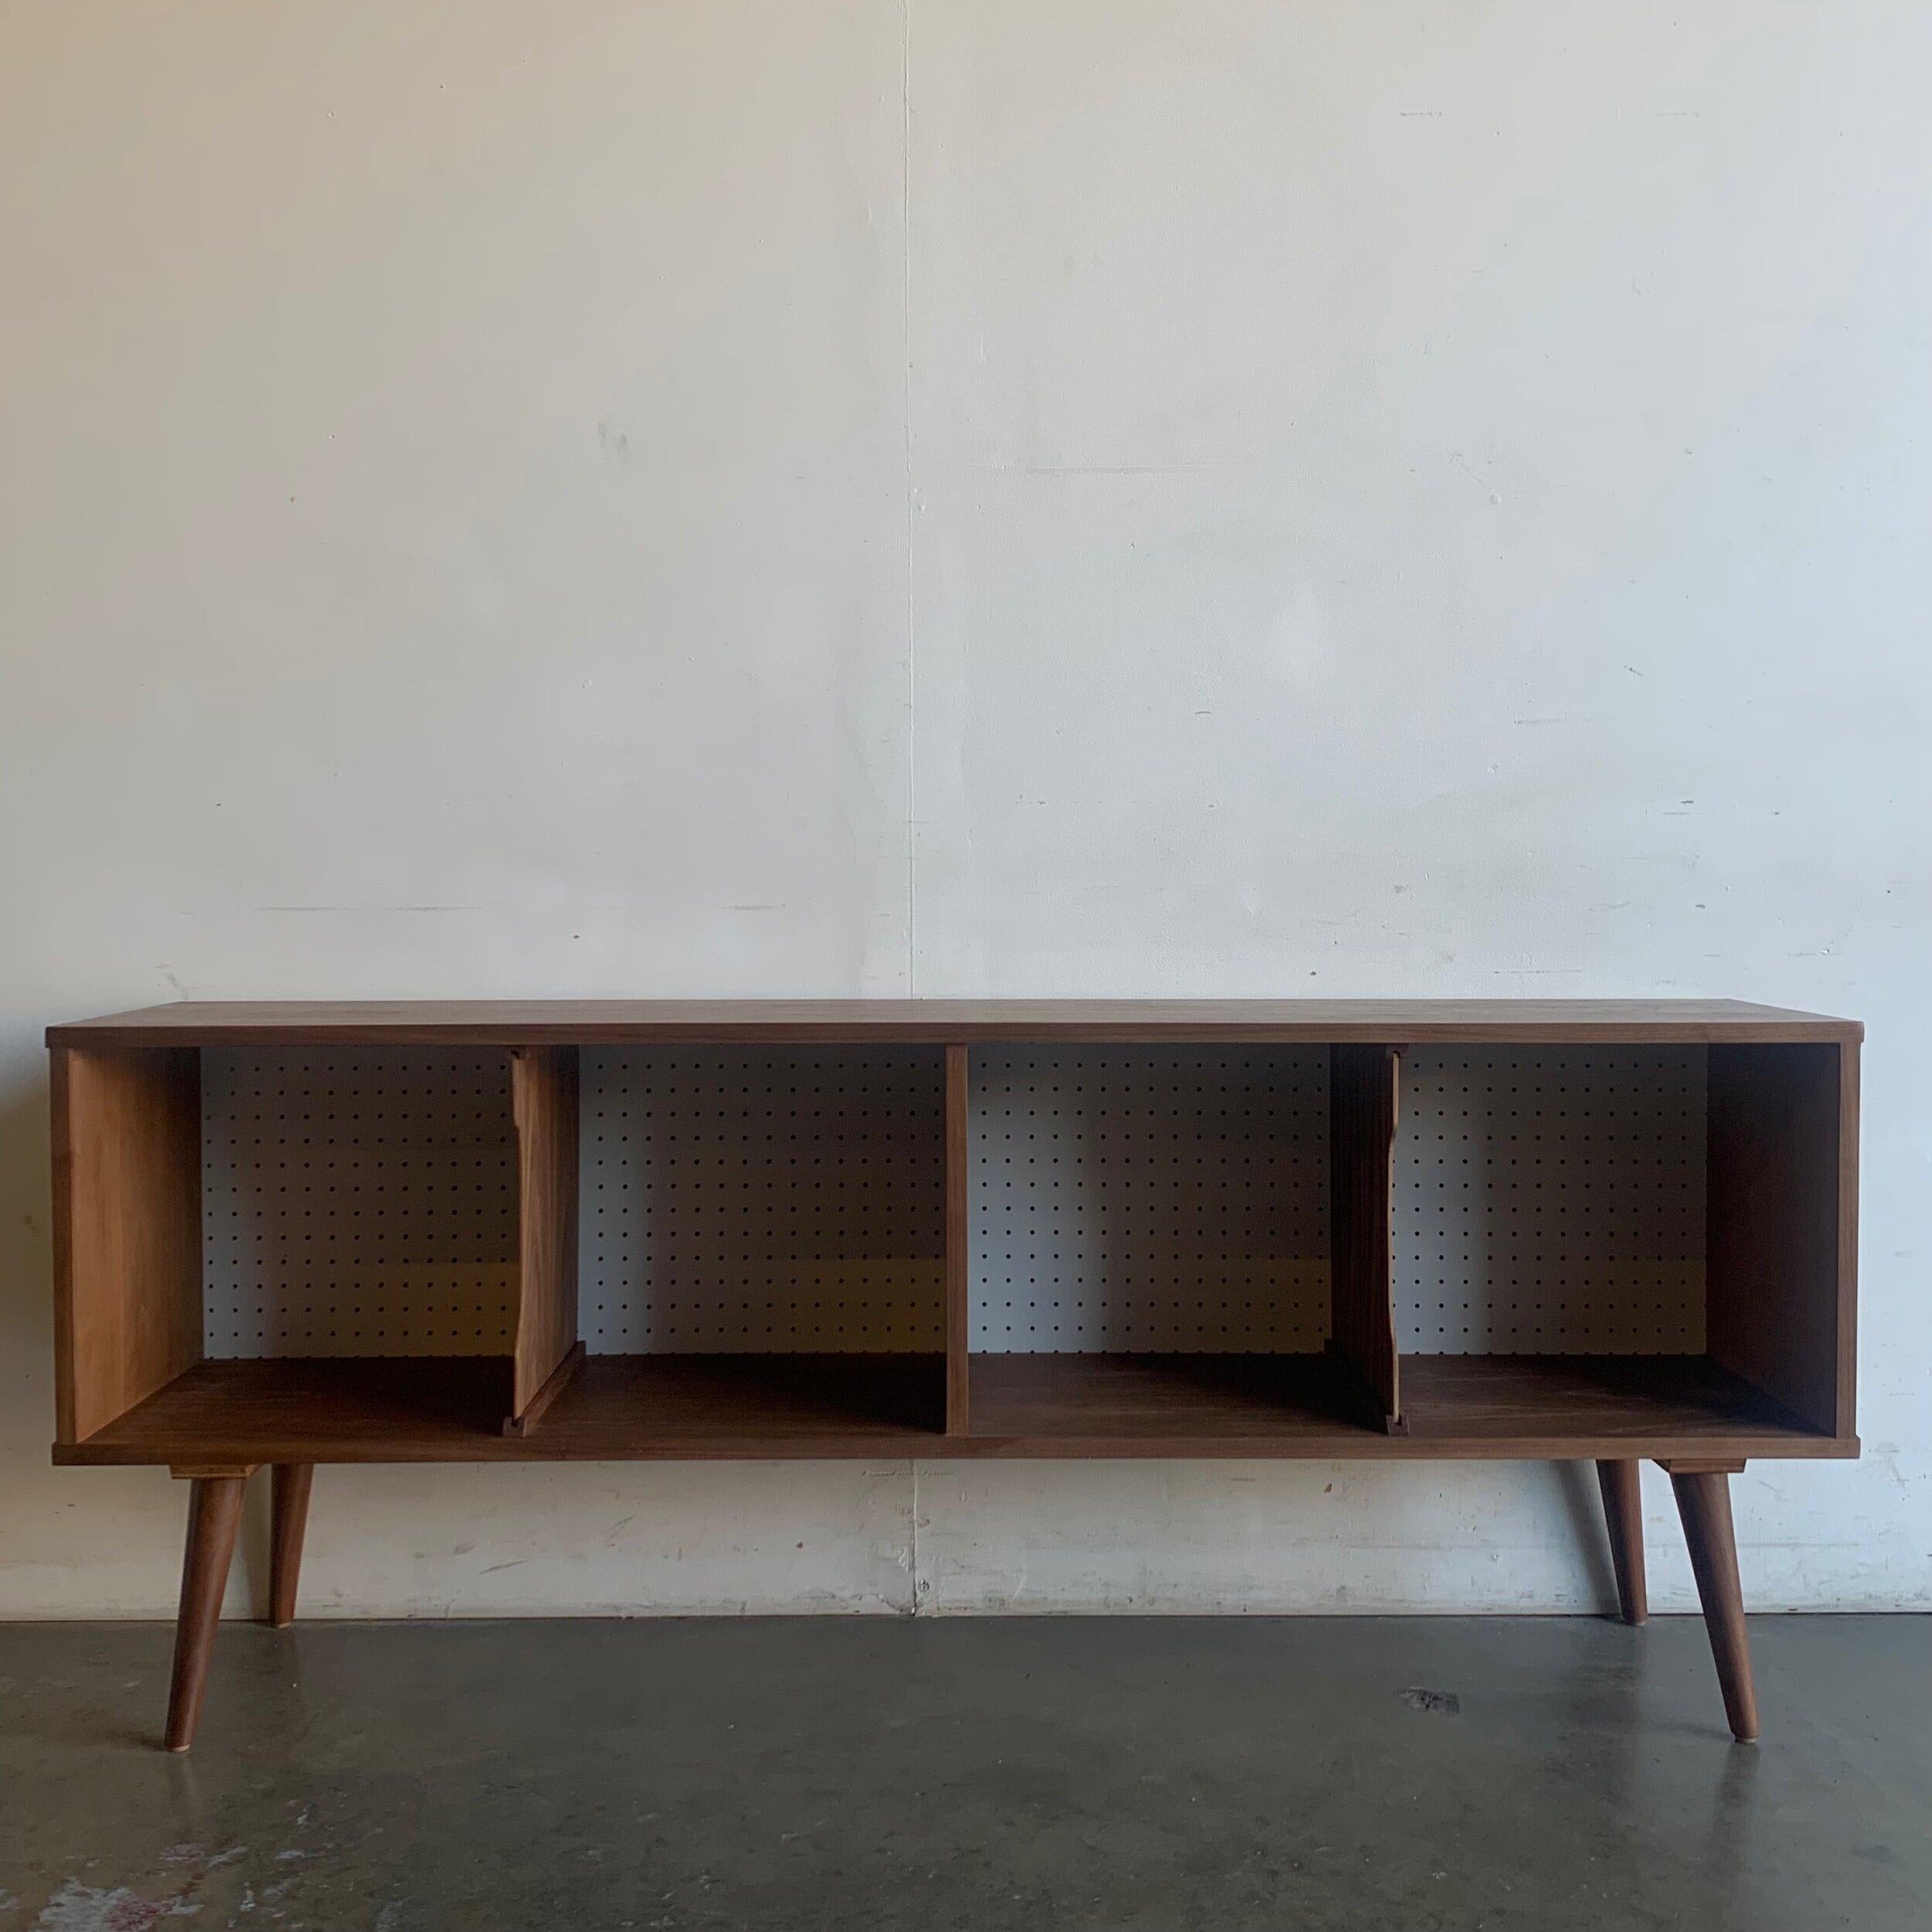 W64 D13.25 H25.75

This piece is custom made in house, item features removable center dividers and a white perforated backing.

This item is not currently available on the showroom floor but can be made available within 4-6 weeks after purchase in